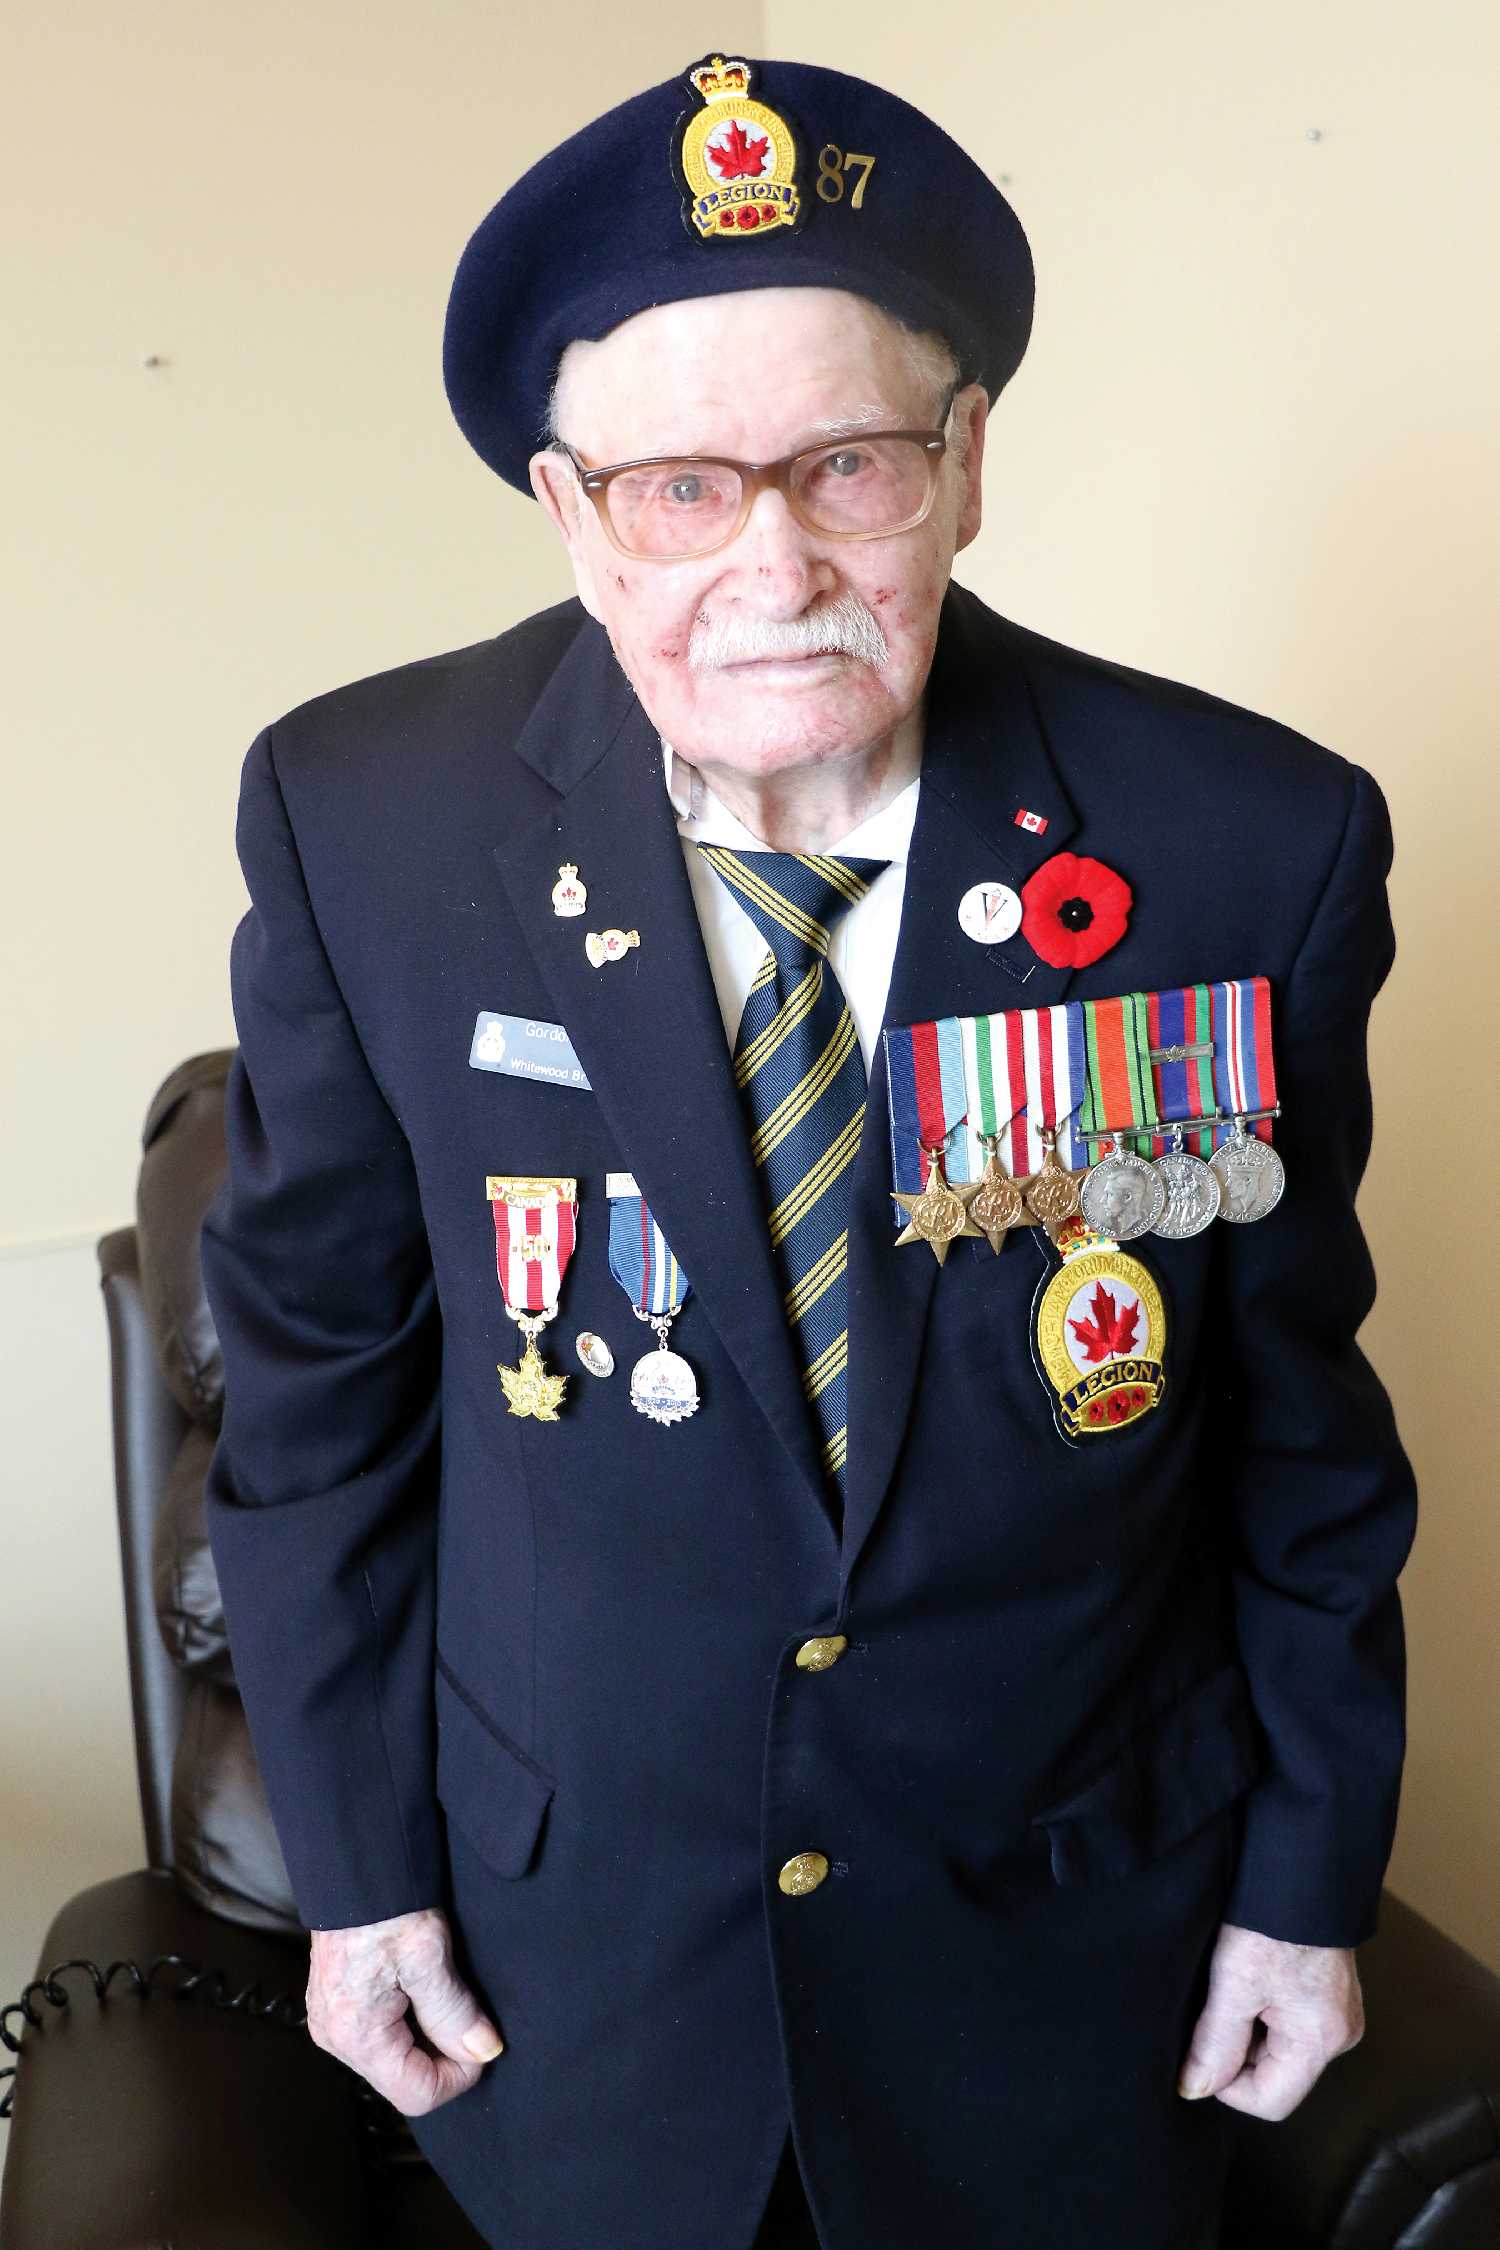 Second World War veteran Gordon Jones is one of the few veterans from a time of war, who is still here with us today and is able to share his experience from the past in honor of the sacrifices veterans have made.